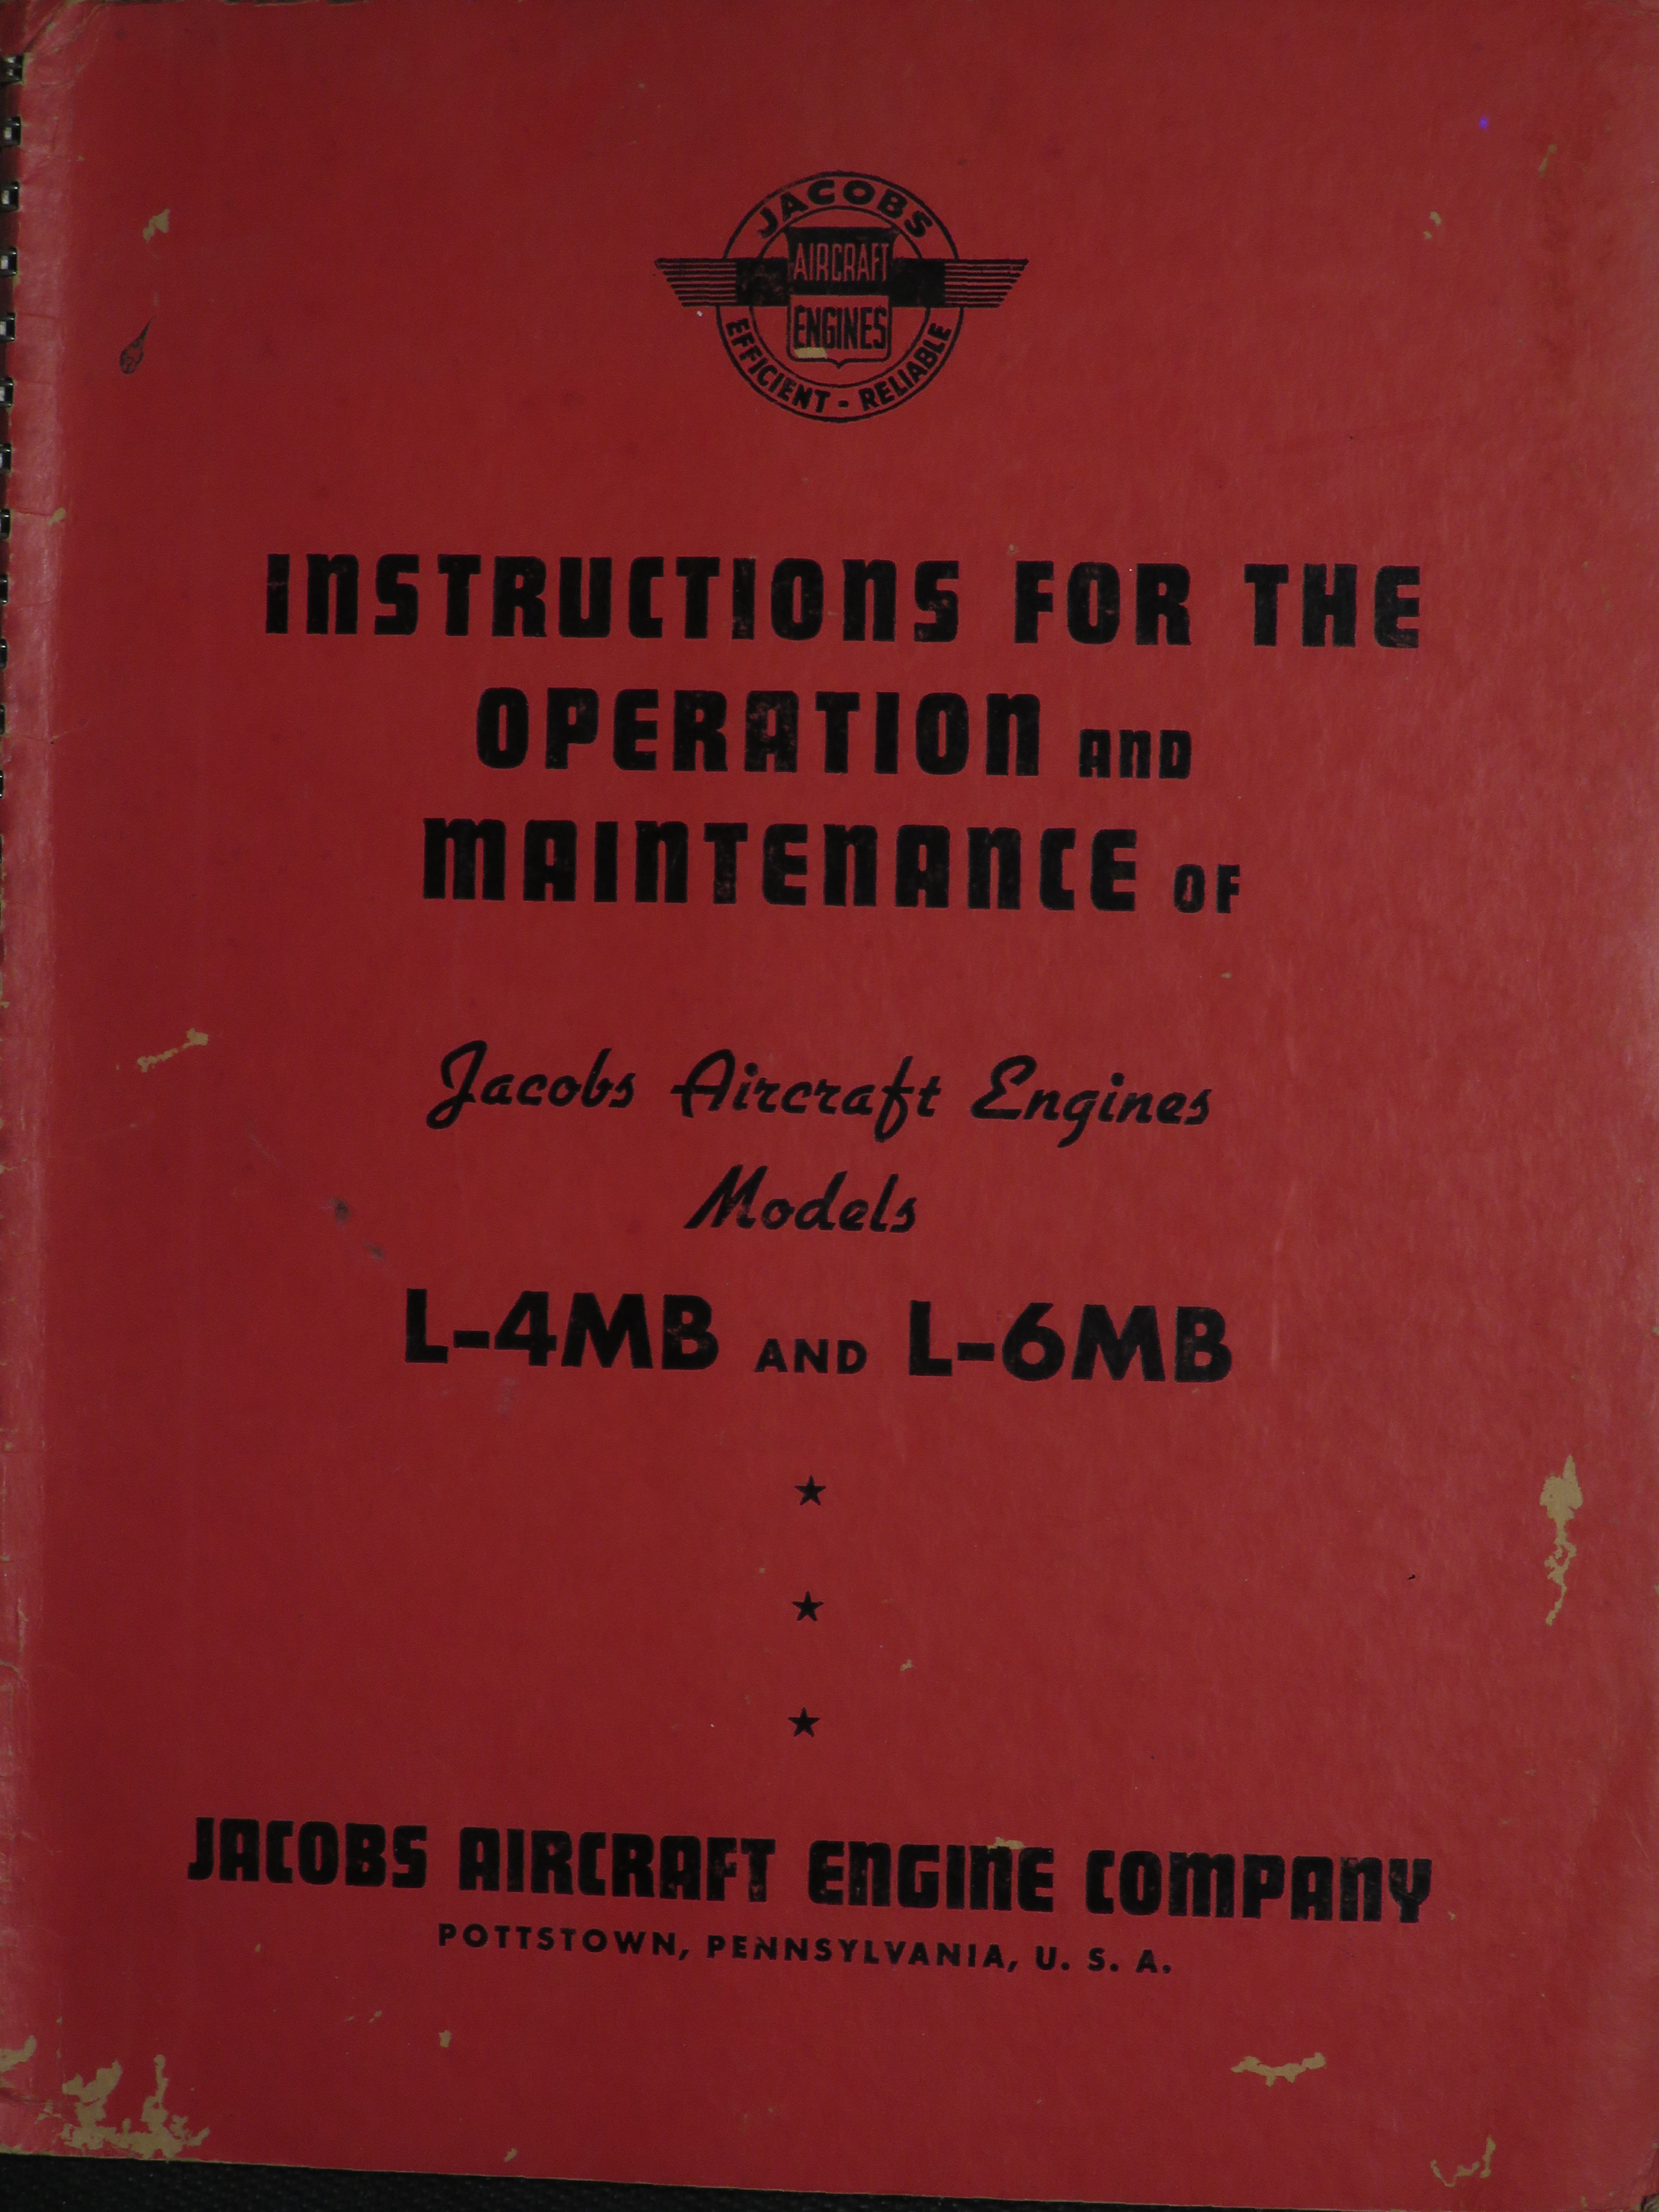 Sample page 1 from AirCorps Library document: Operation and Maintenance Instructions for the L-4MB and L-6MB Engines